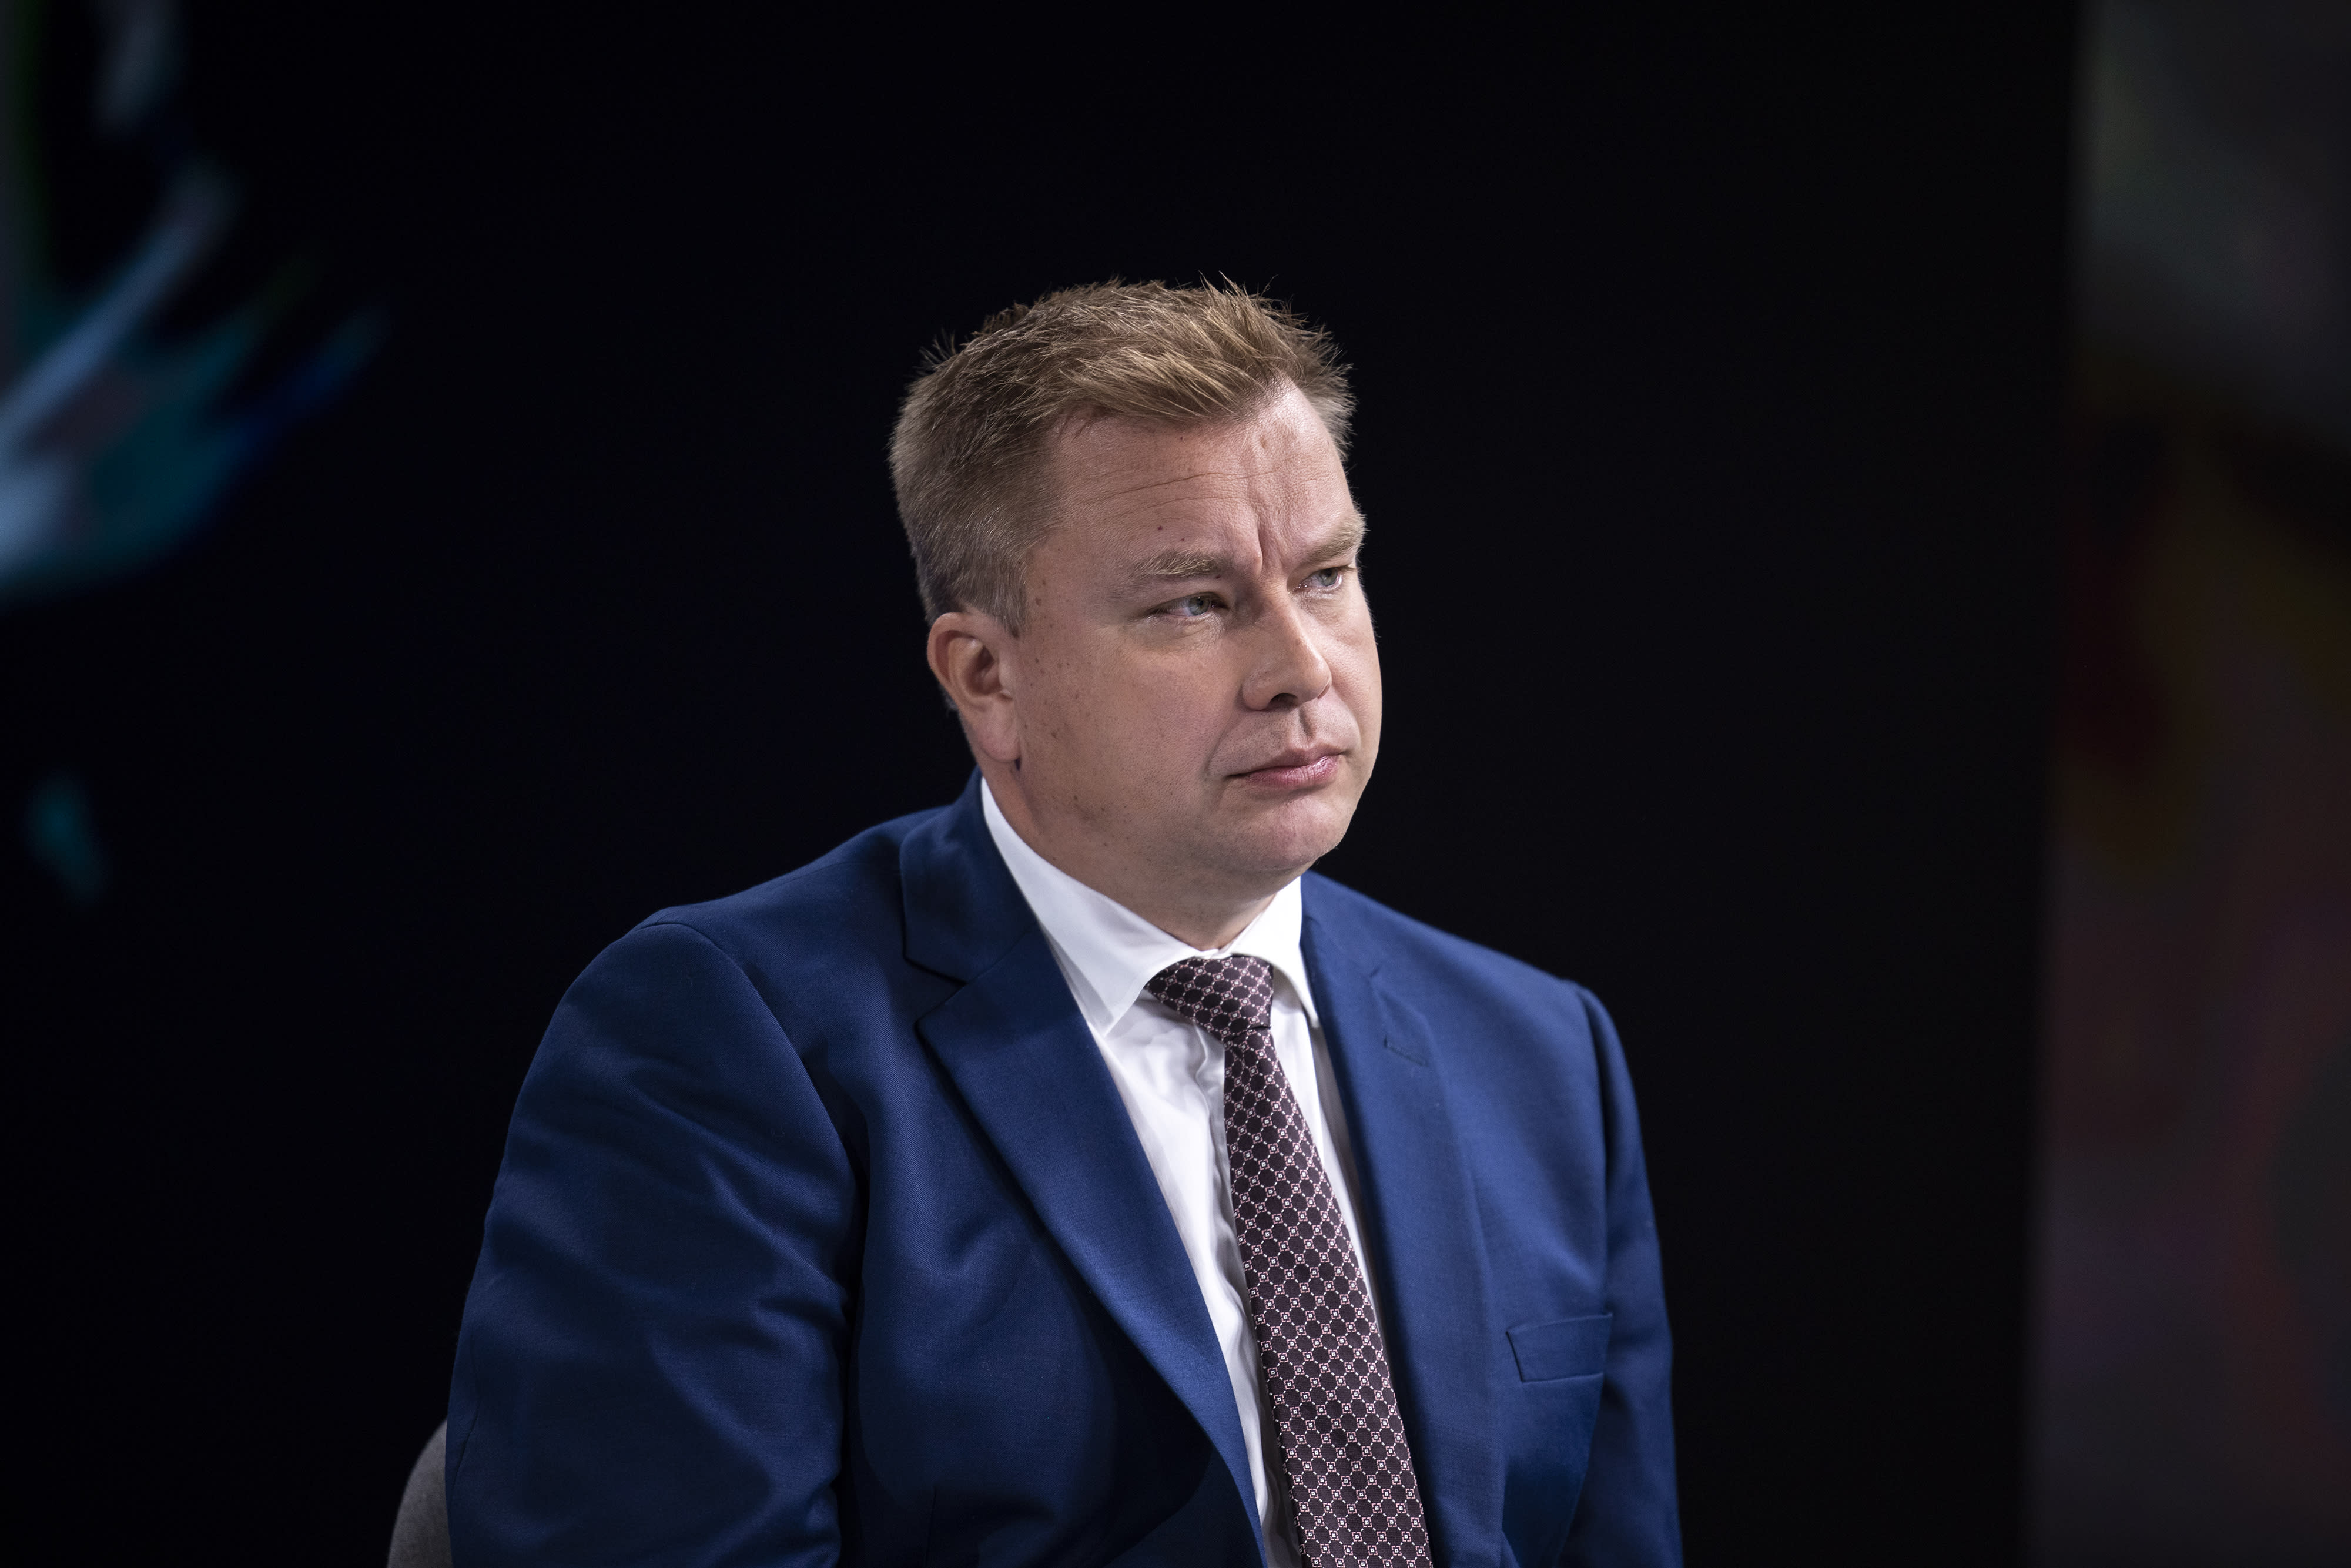 Minister of Defense: Finland is not under military threat, but regional tensions may rise